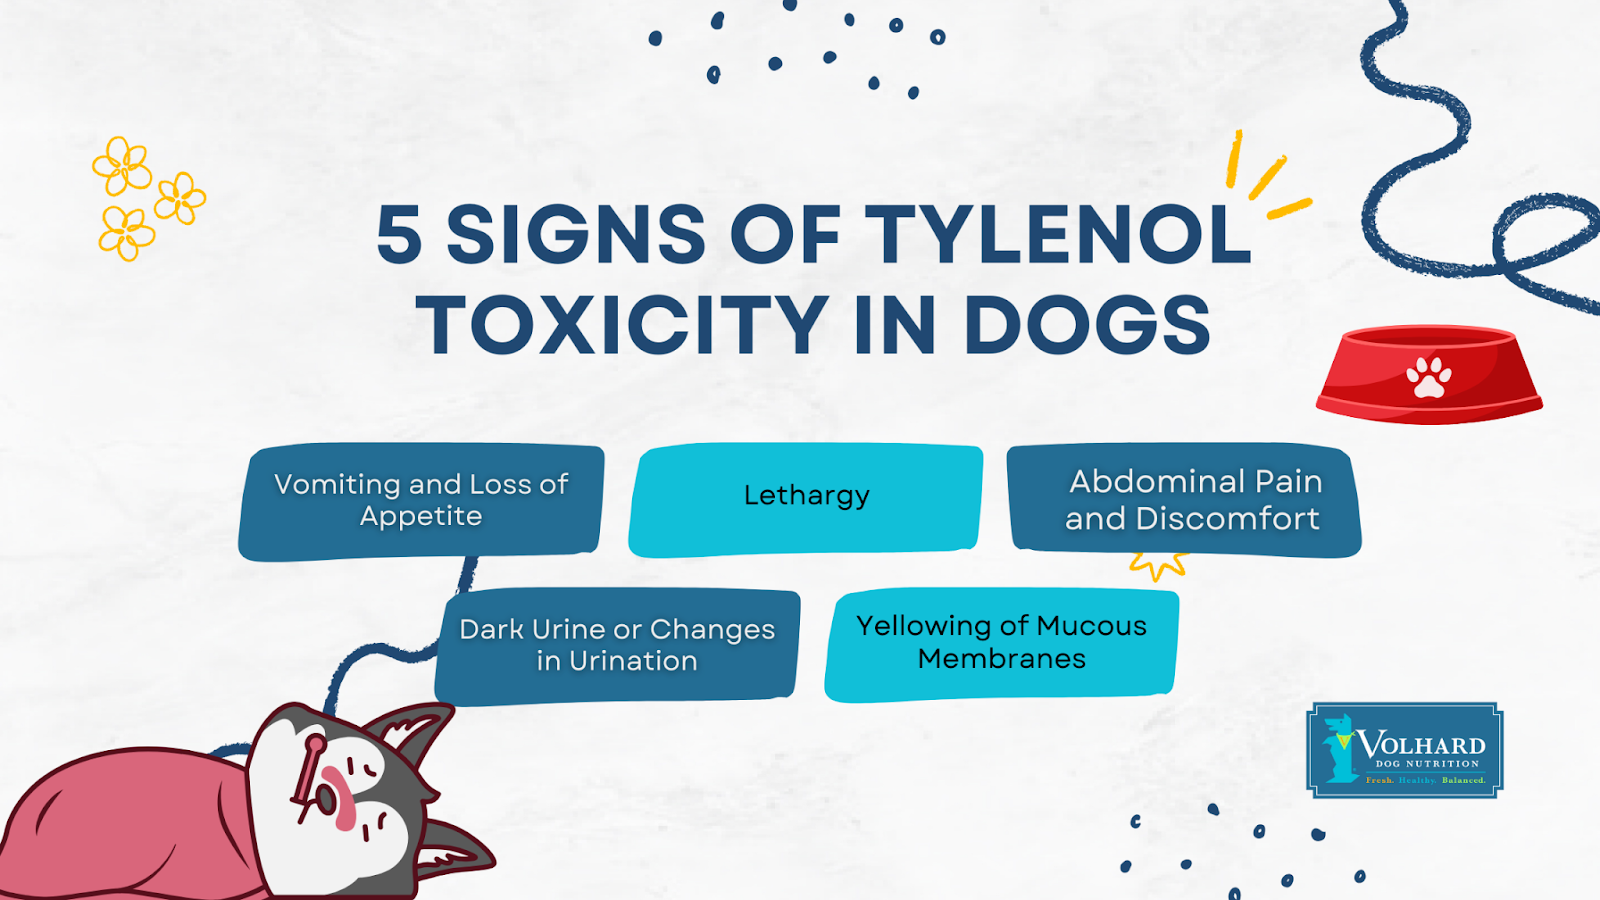 5 signs of tylenol toxicity in dogs